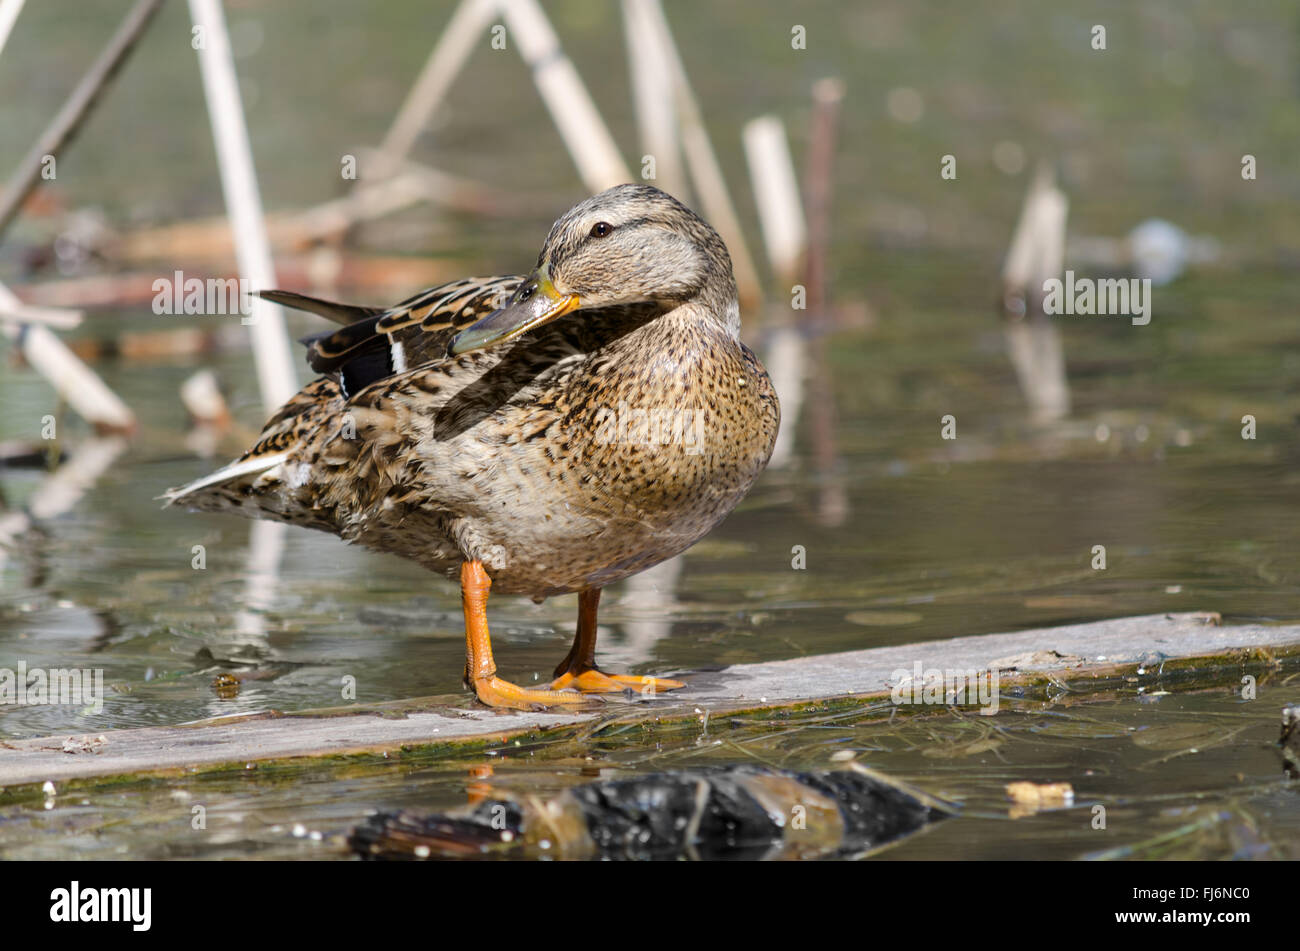 Wild duck, on the city's reservoirs. Stock Photo